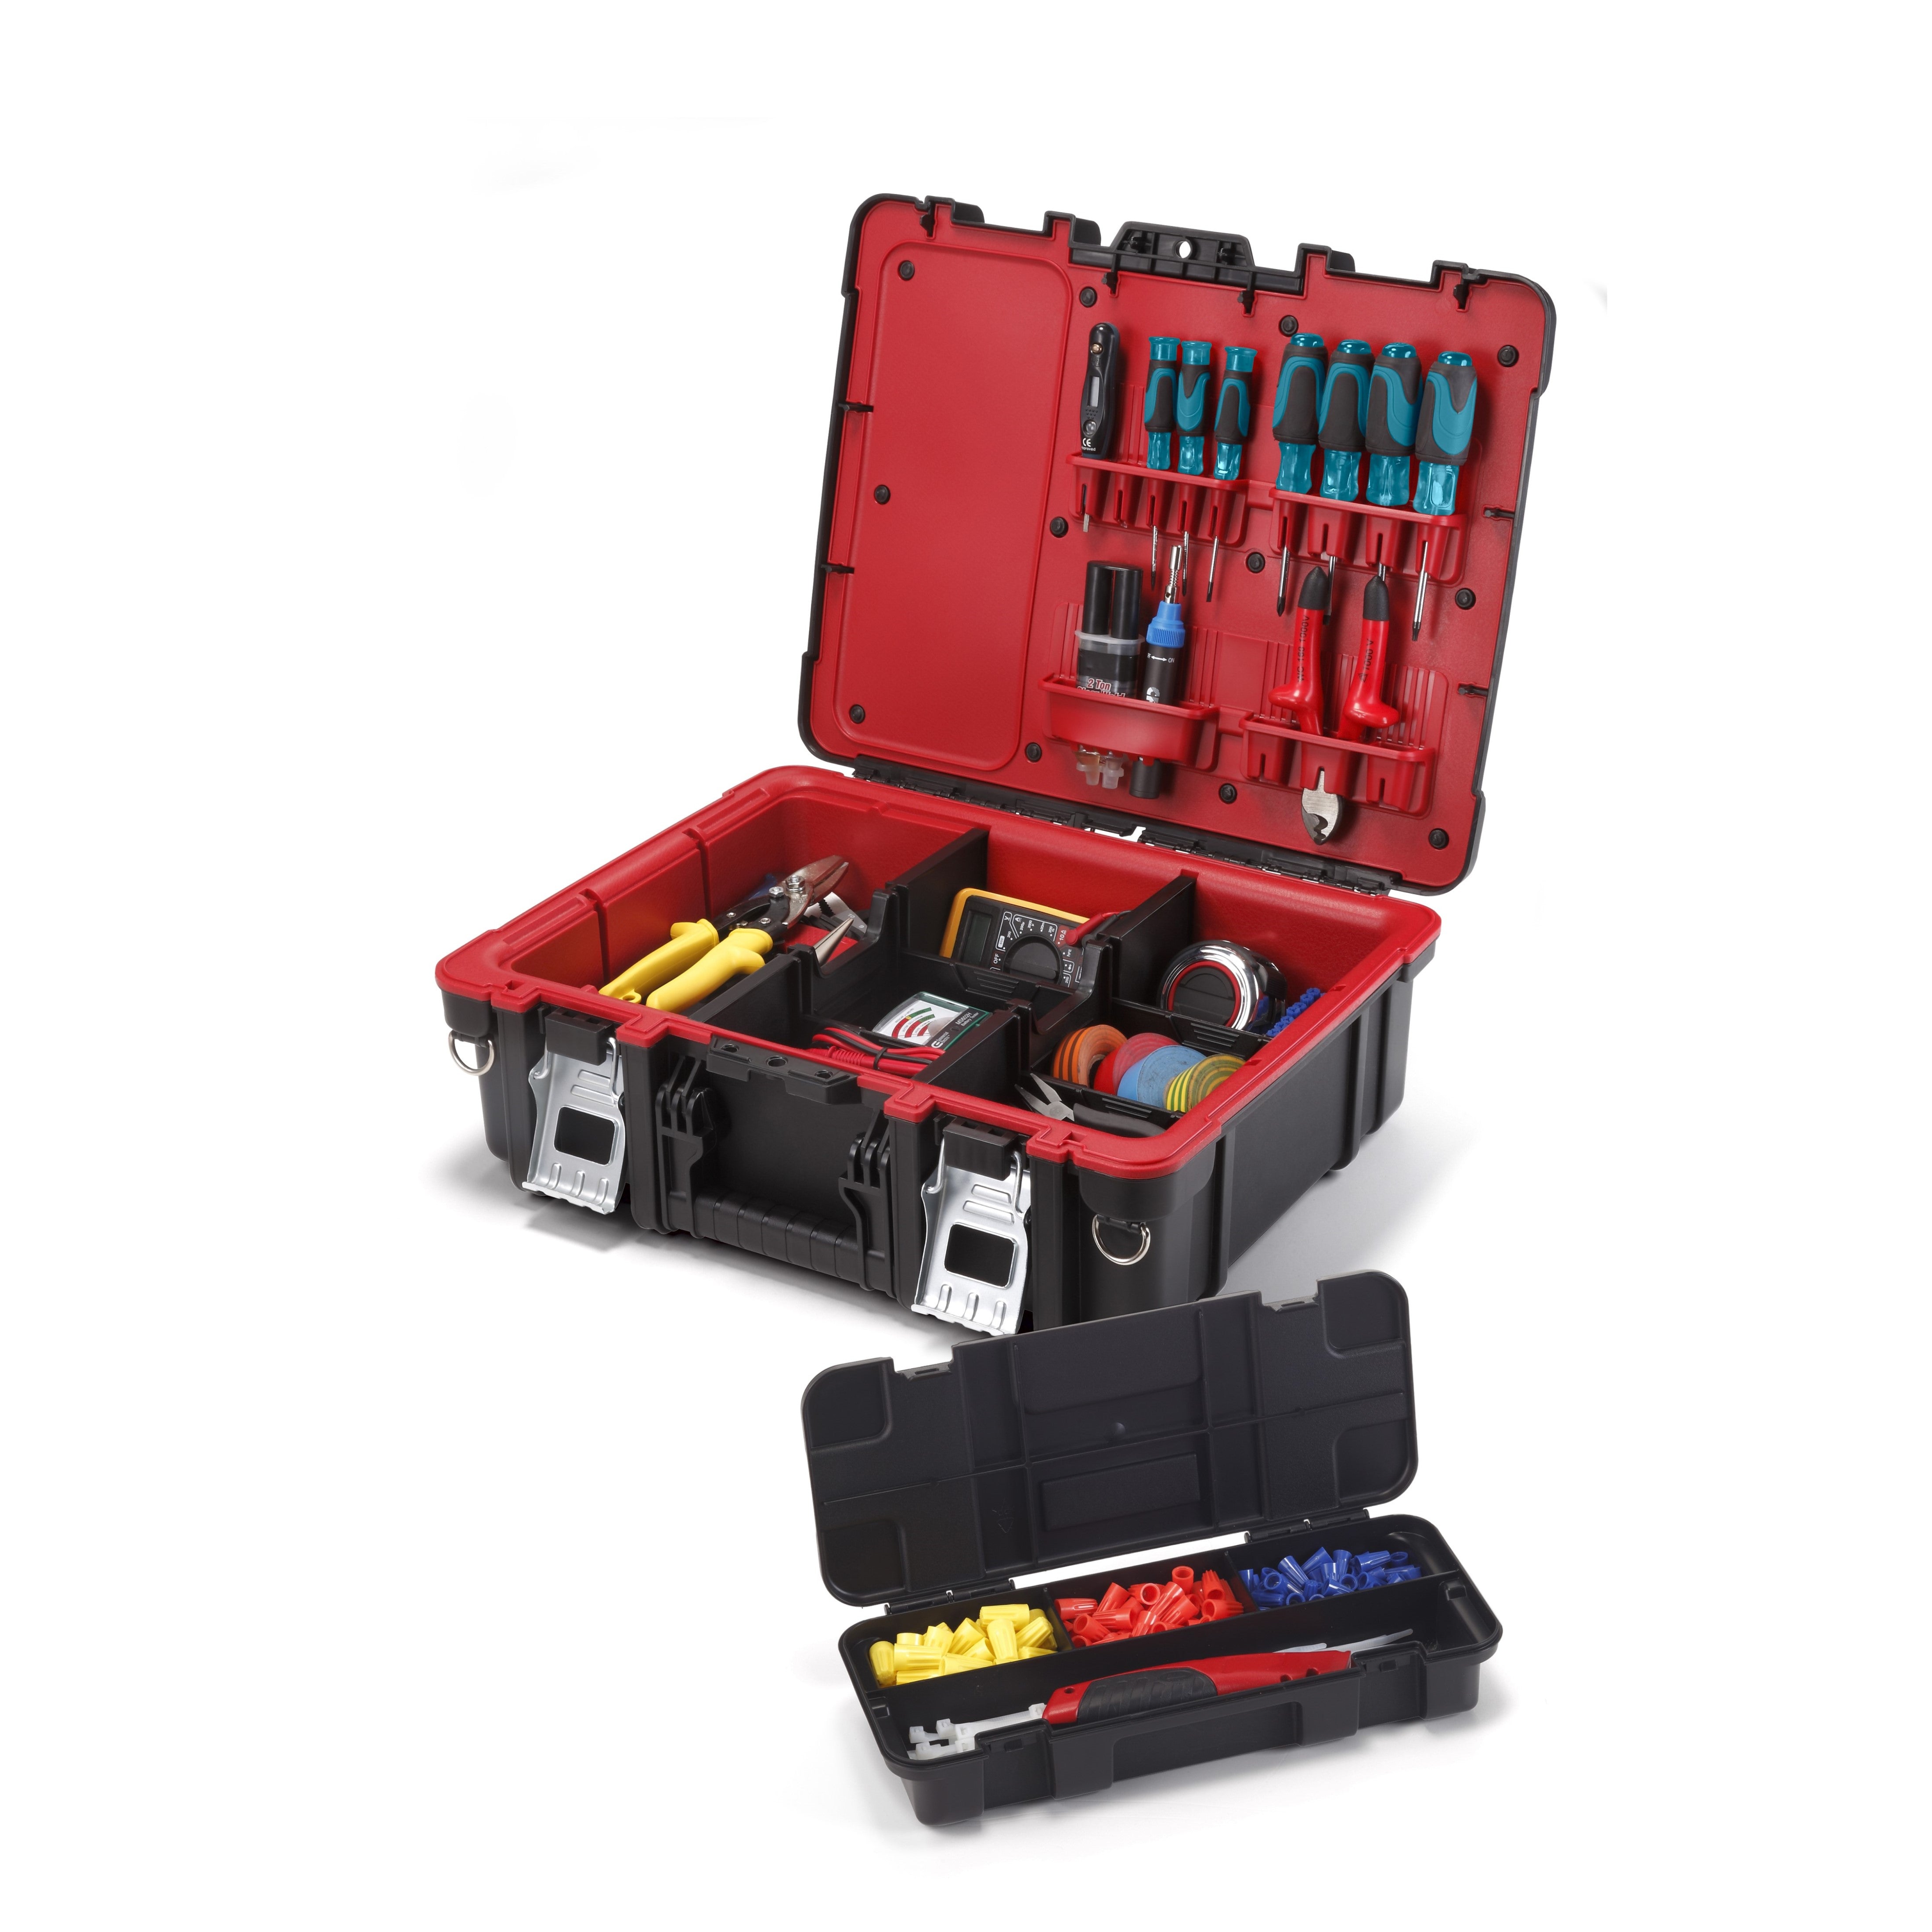 Keter Technician case full of tools with organiser